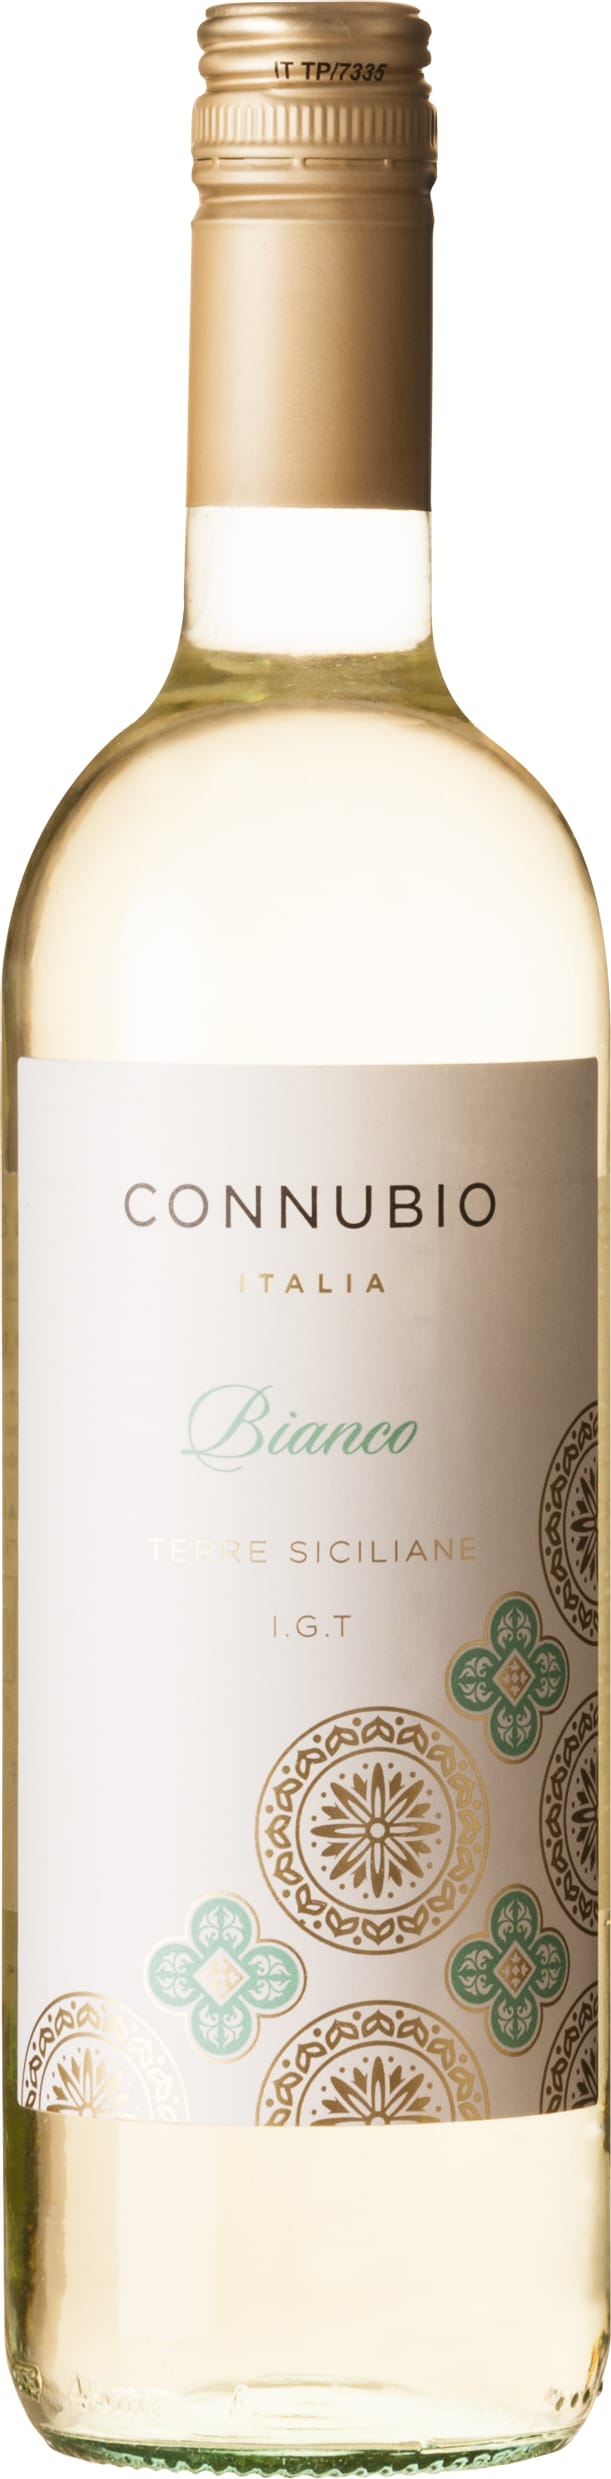 Bianco IGT Terre Siciliane 22 Connubio 75cl - Buy Connubio Wines from GREAT WINES DIRECT wine shop